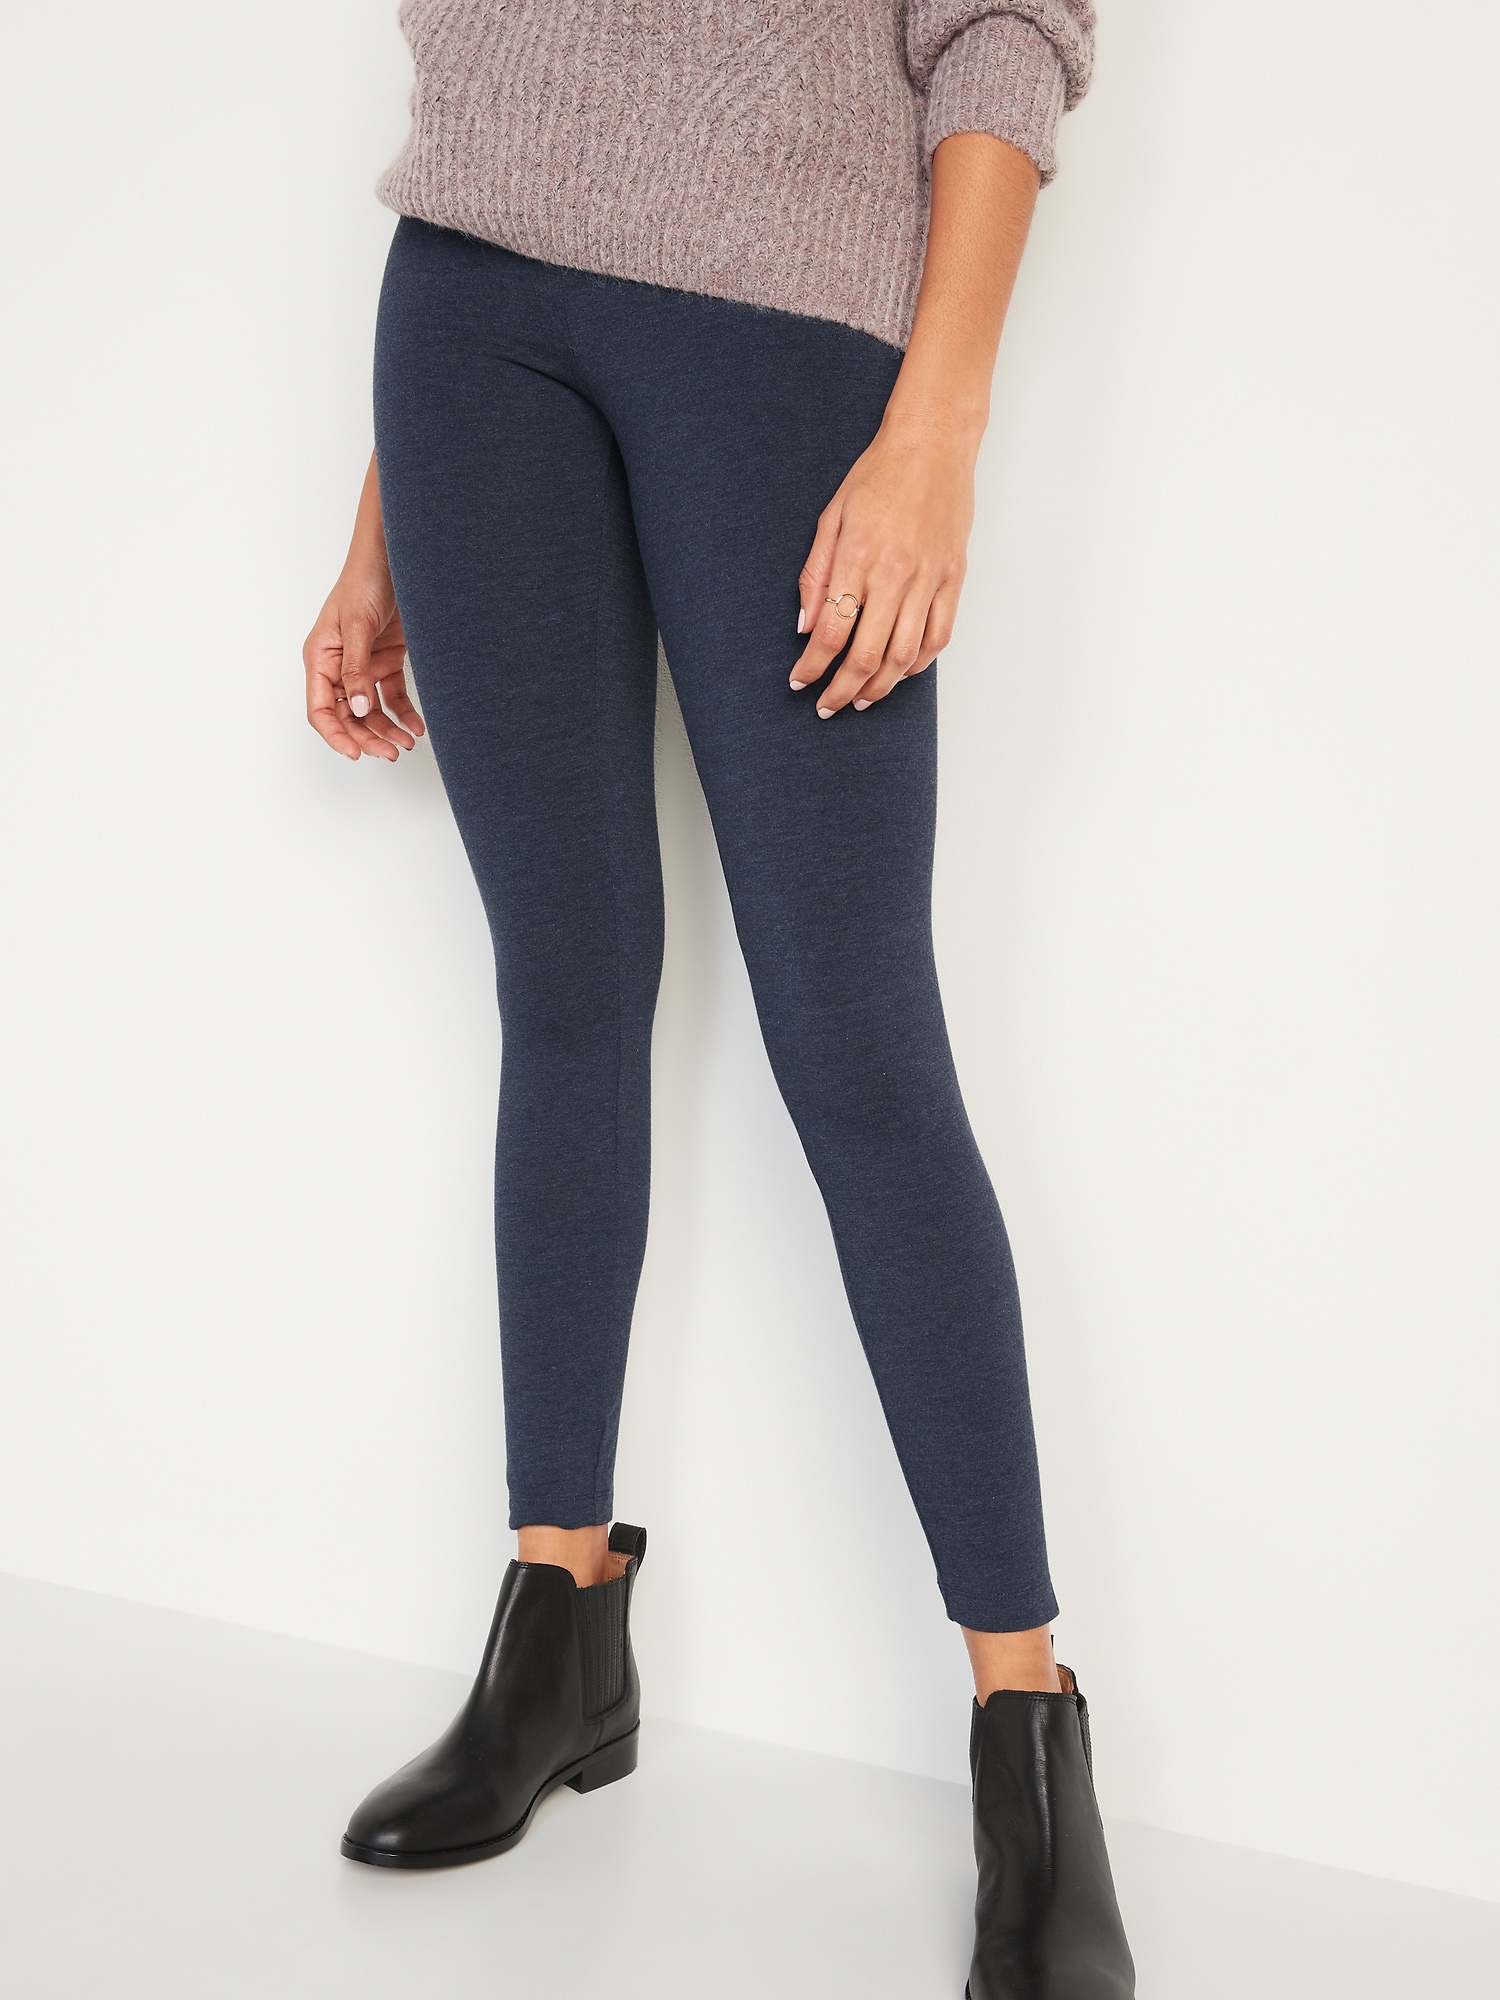 J.Jill Ponte Knit Leggings Charcoal Gray Center Seam Mid Rise Stretch Size  S - $25 - From Jenna